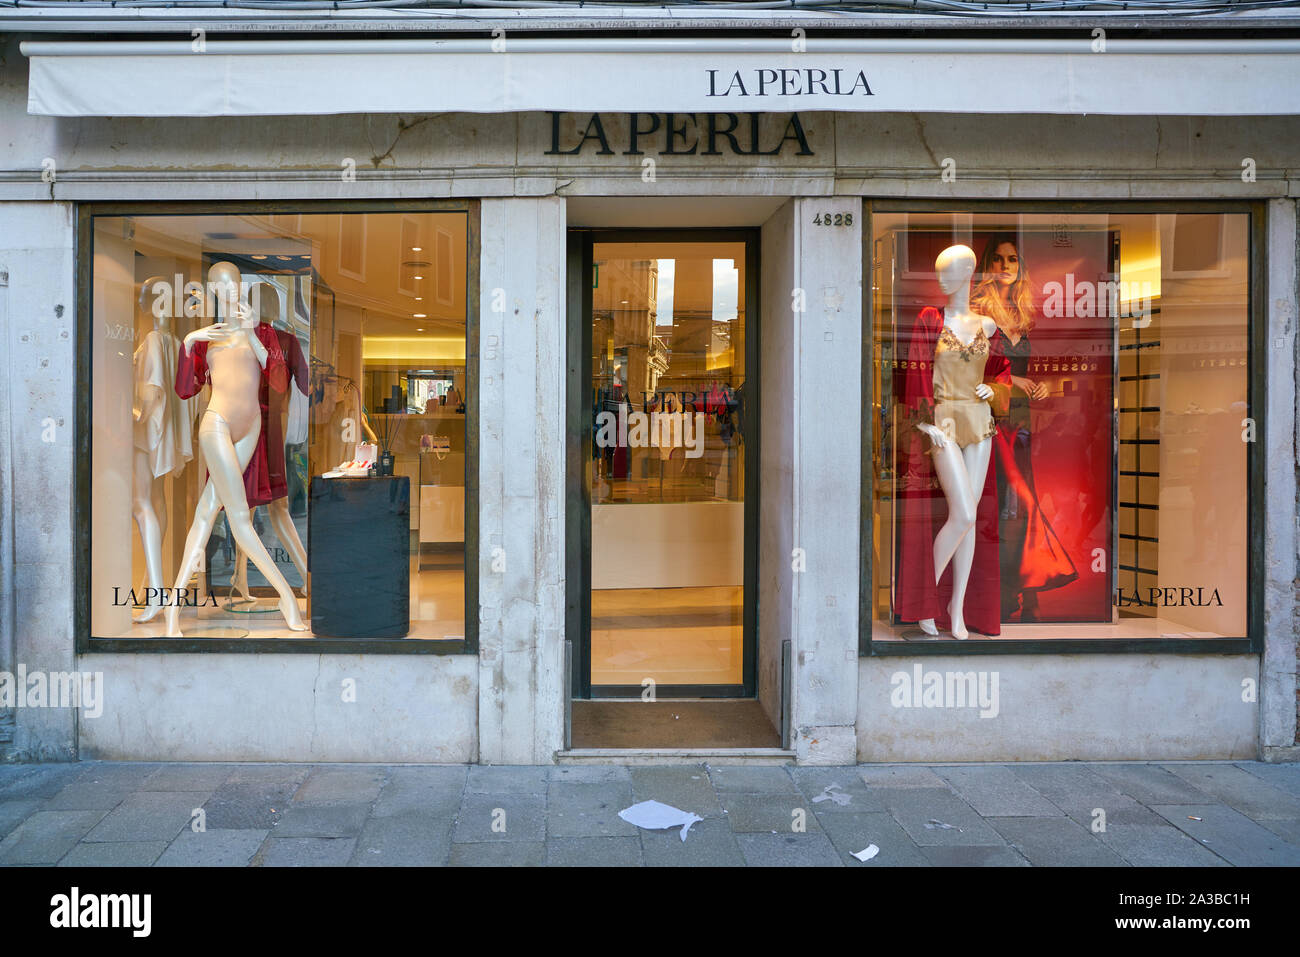 La Perla Shop Window High Resolution Stock Photography and Images - Alamy